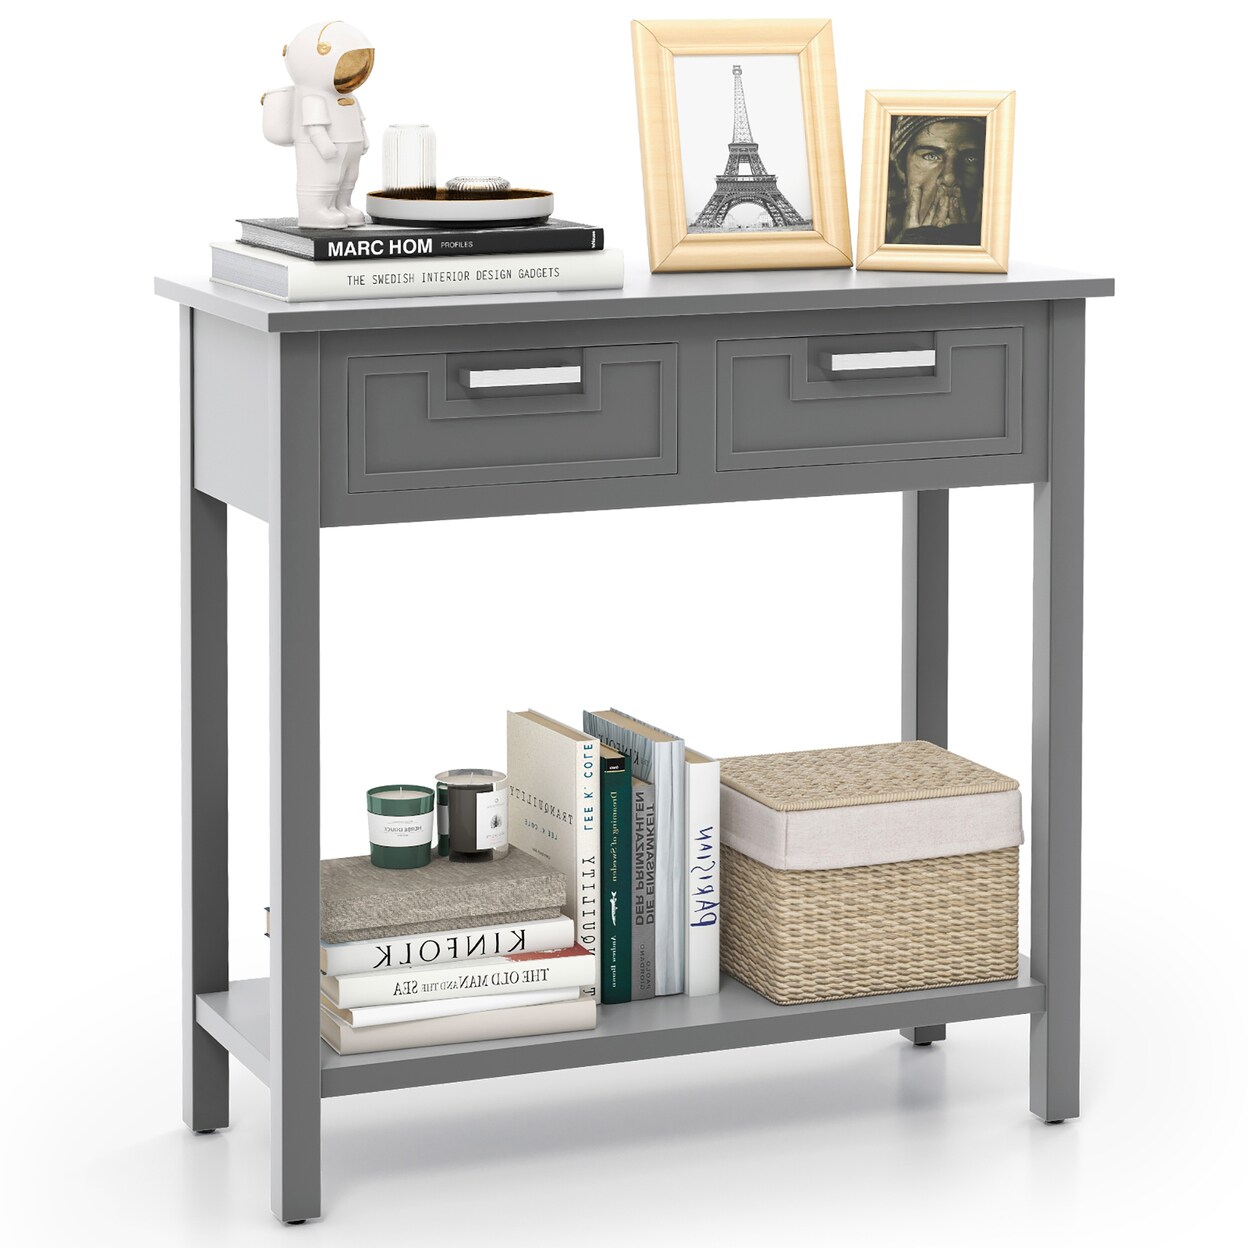 Gymax Narrow Console Table with Drawers Retro Accent Sofa Table w/ Open Storage Grey